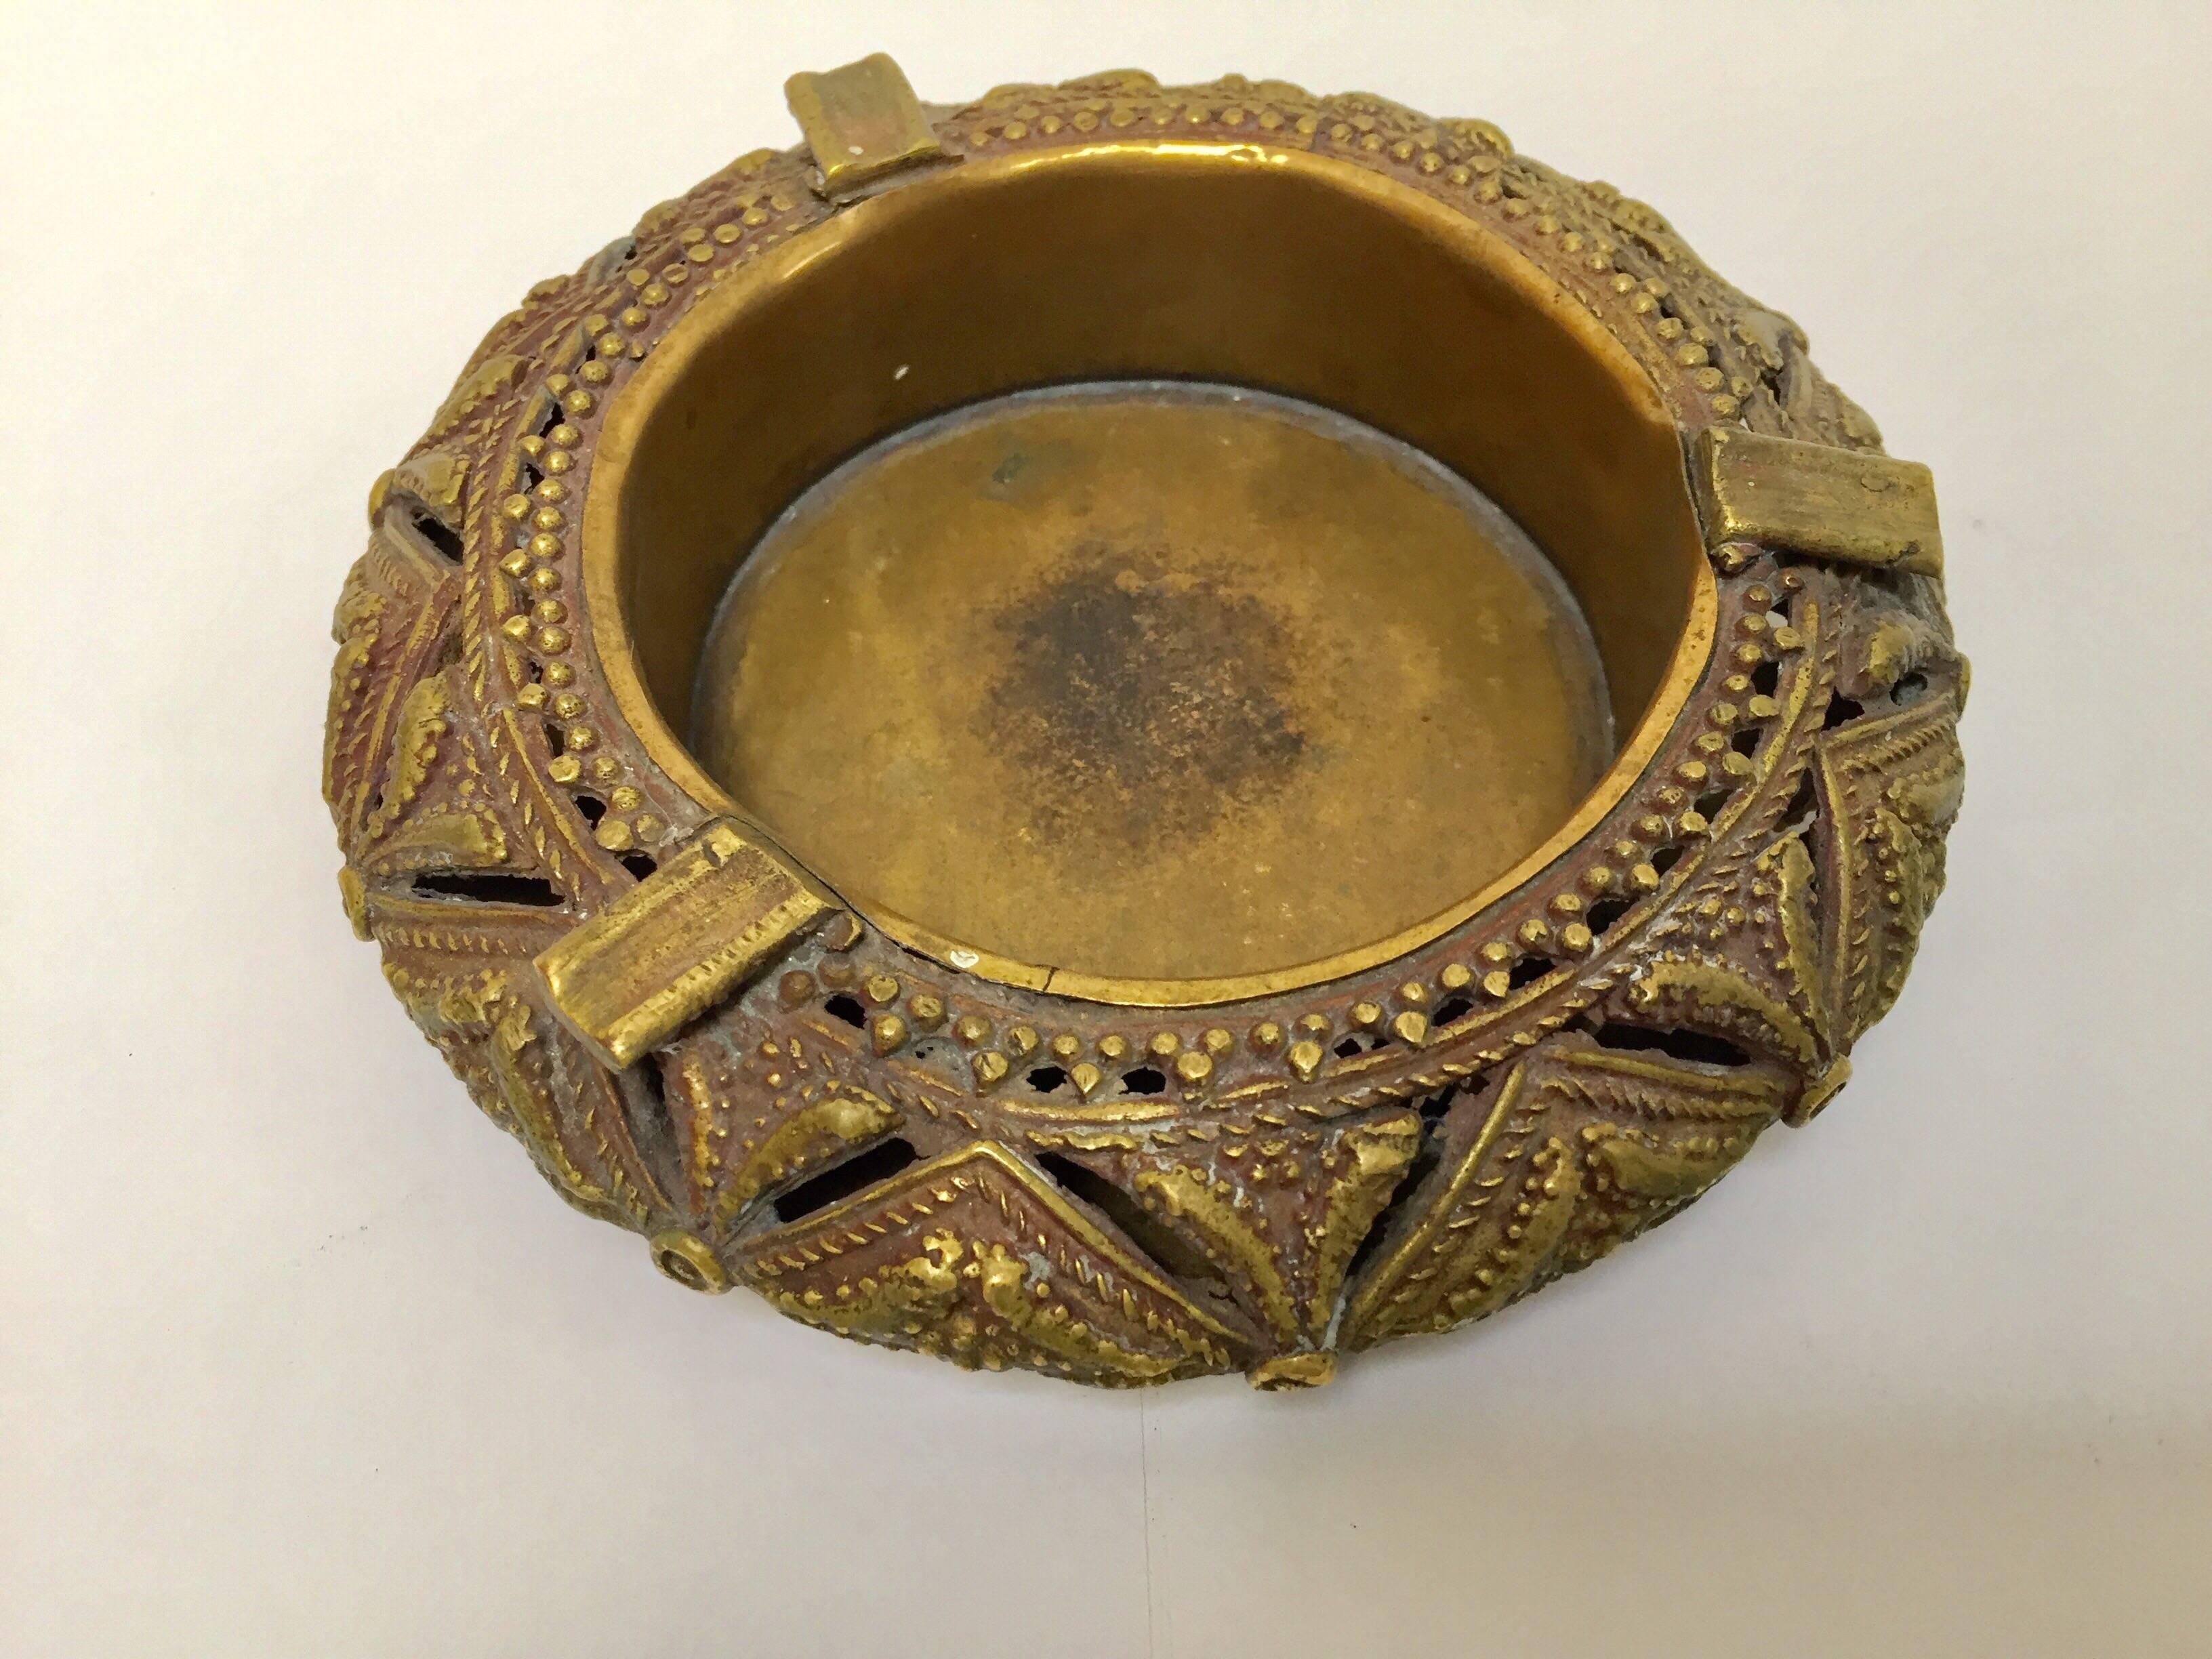 Pair of Round Handcrafted Brass Ashtrays In Good Condition For Sale In North Hollywood, CA